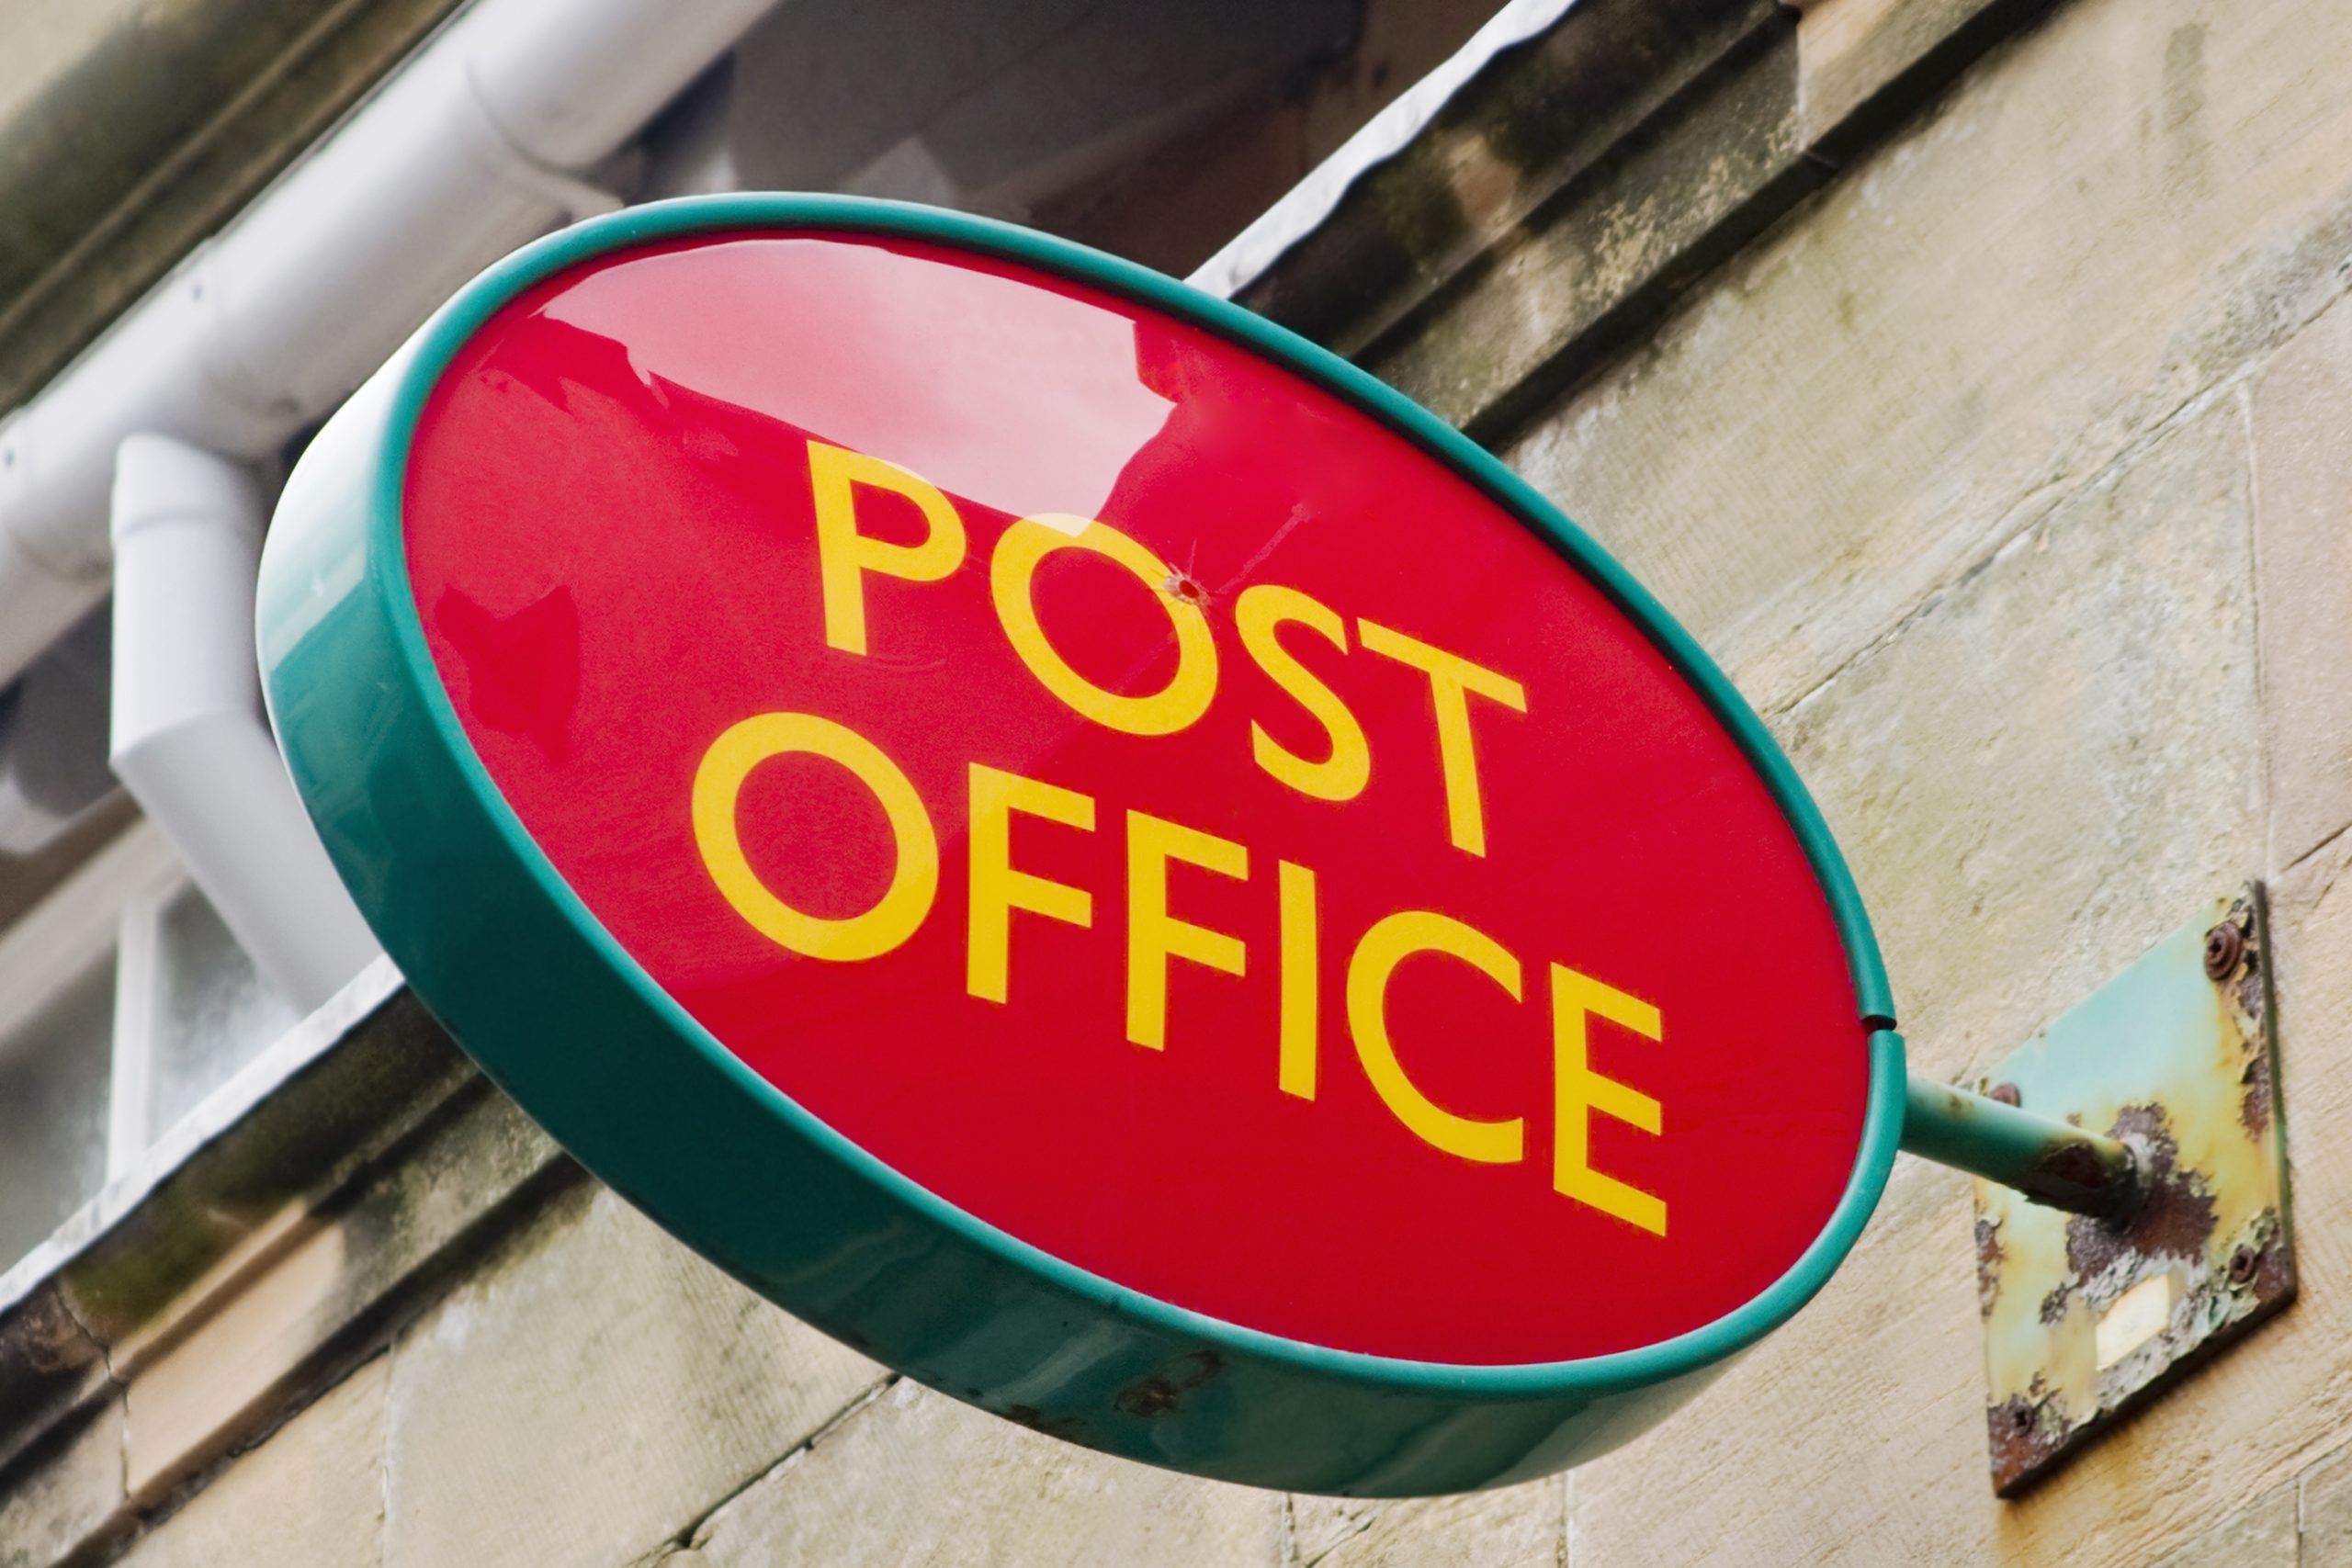 Police investigation into Post Office scandal stepped up as ITV drama airs